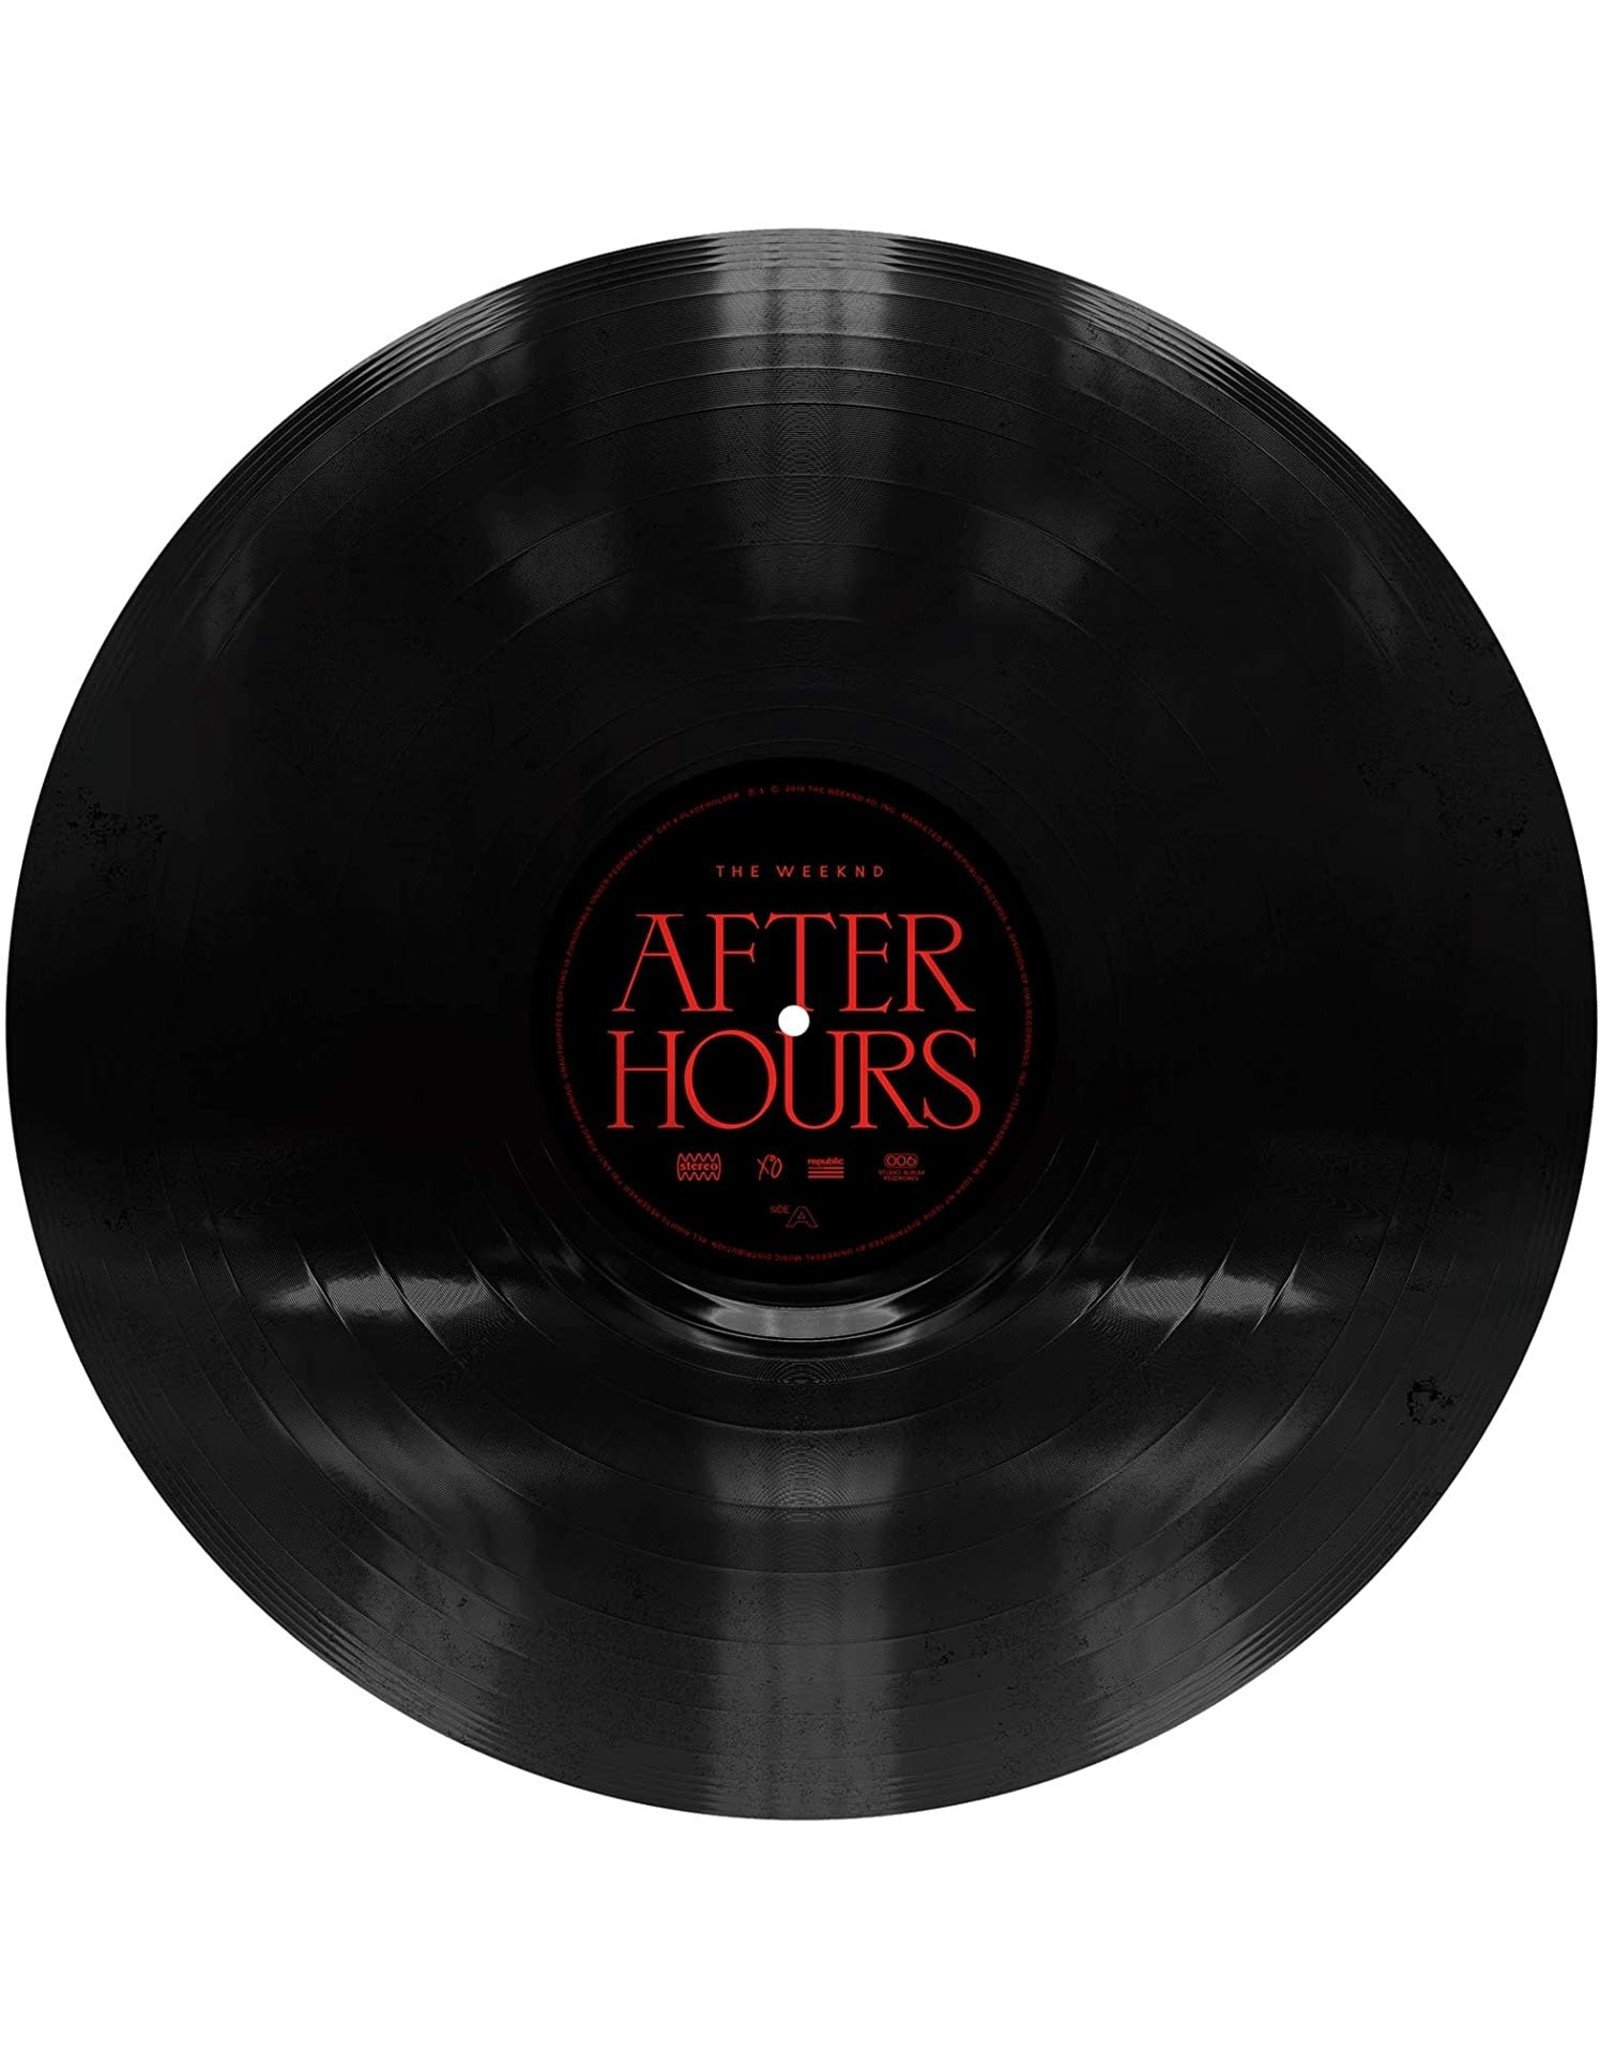 The Weeknd - After Hours (Vinyl) - Pop Music